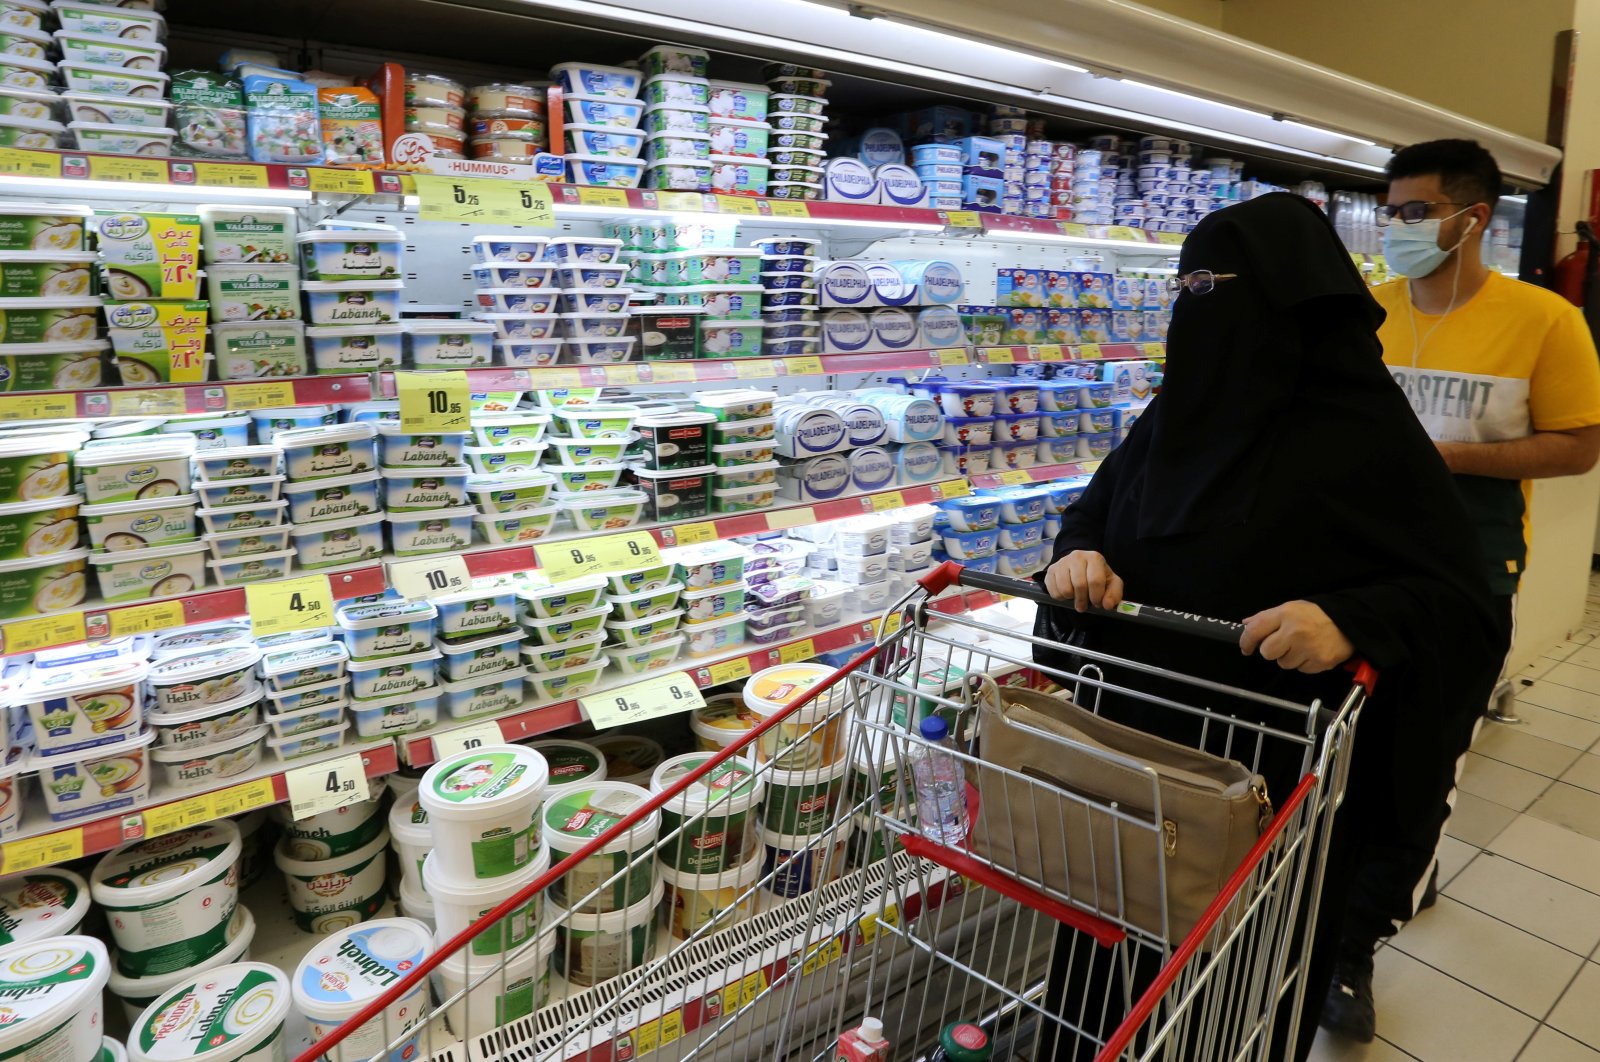 A Saudi woman looks at dairy products in a supermarket in Riyadh, Saudi Arabia, Oct. 18, 2020. (Reuters Photo)